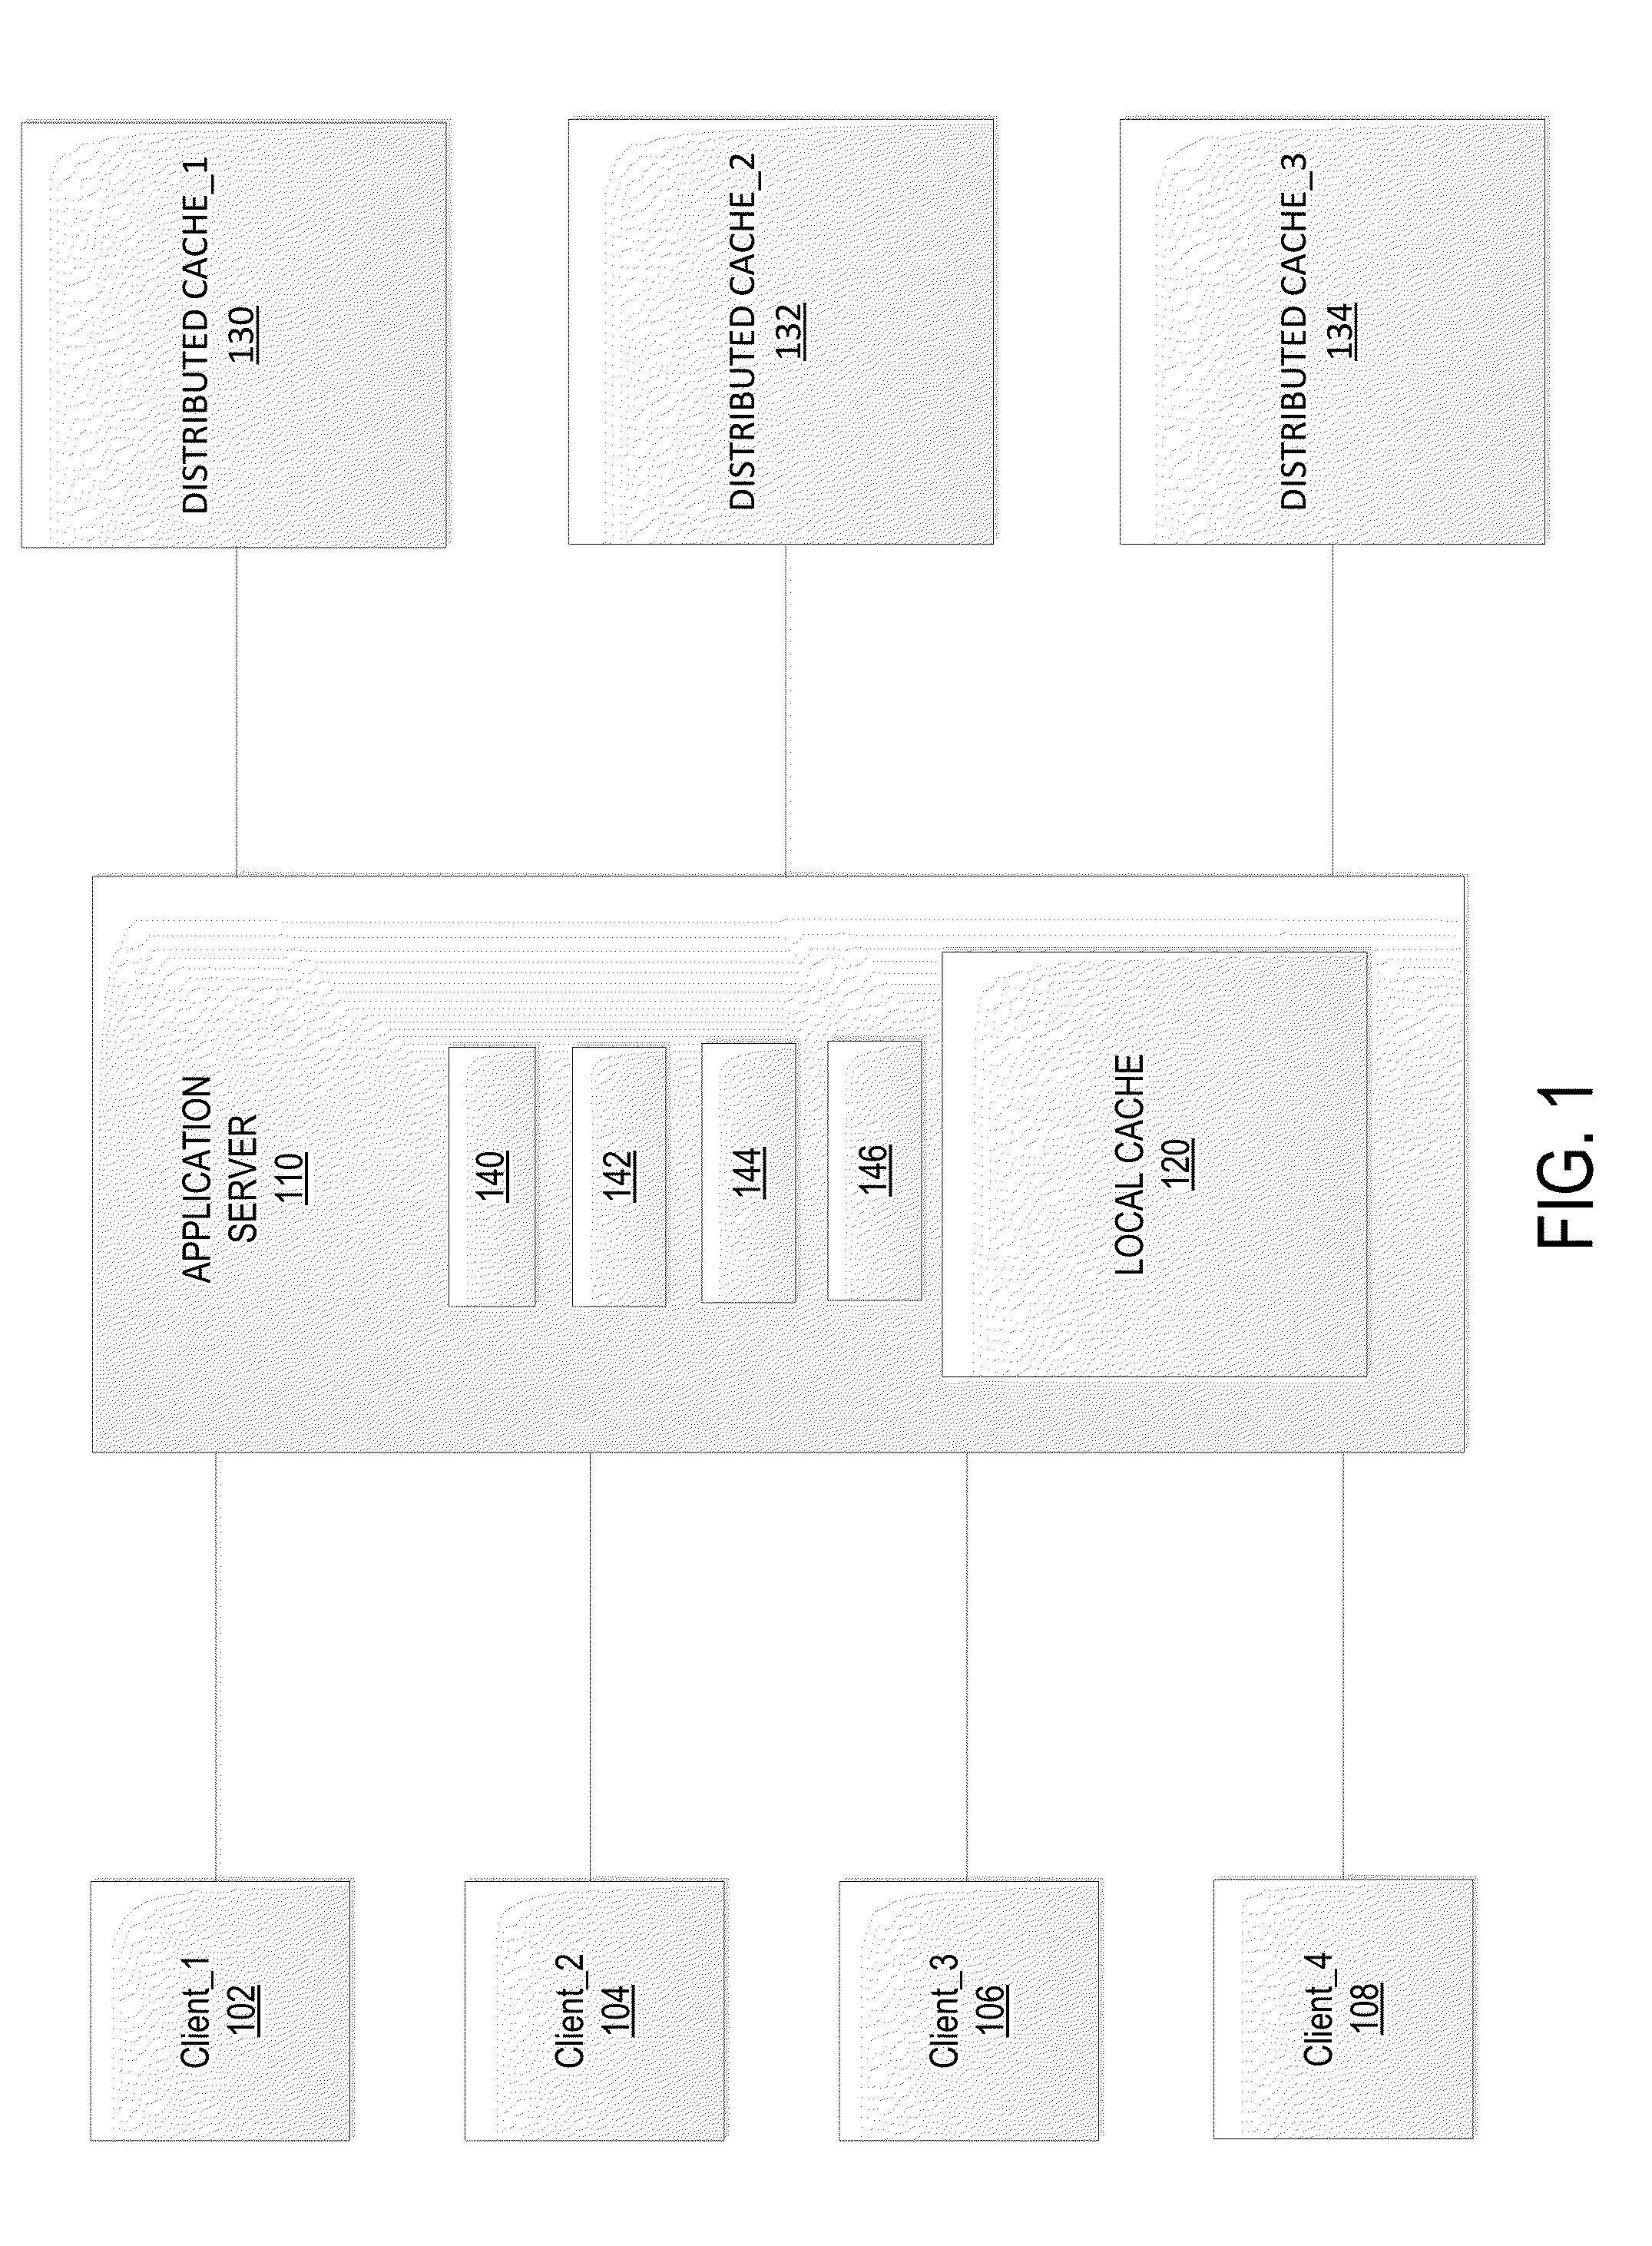 Distributed Cache System